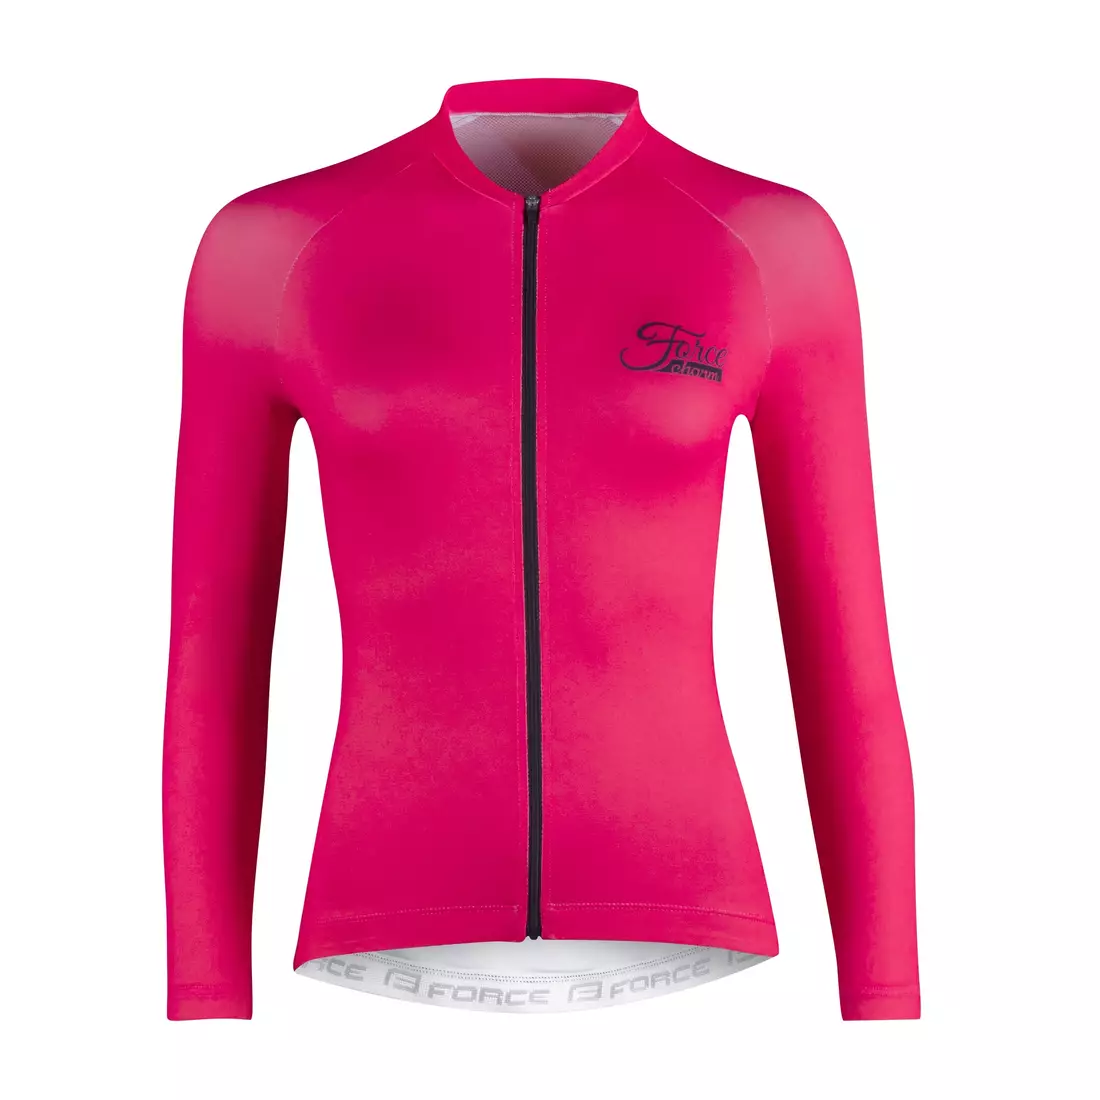 FORCE women's cycling jersey CHARM pink 90014361